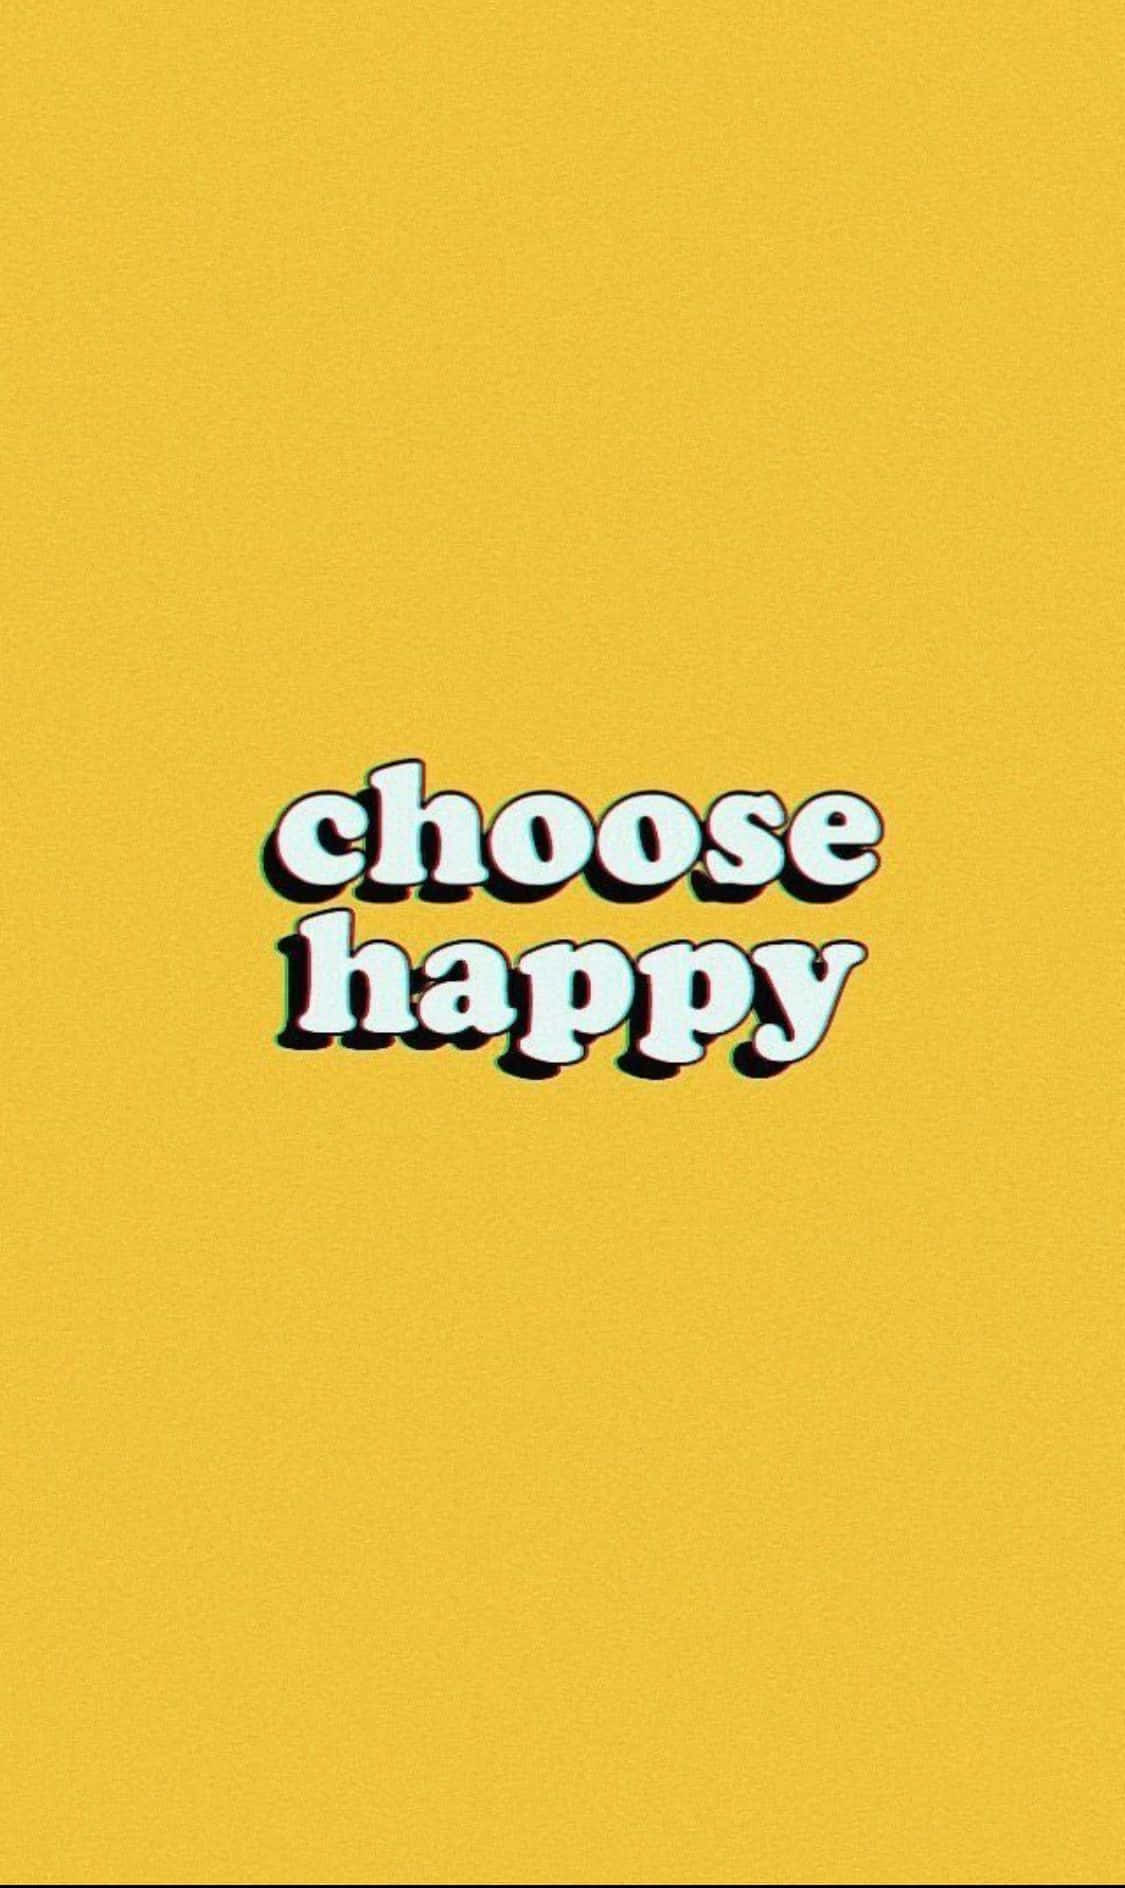 Choose Happy - A Yellow Background With The Words Wallpaper